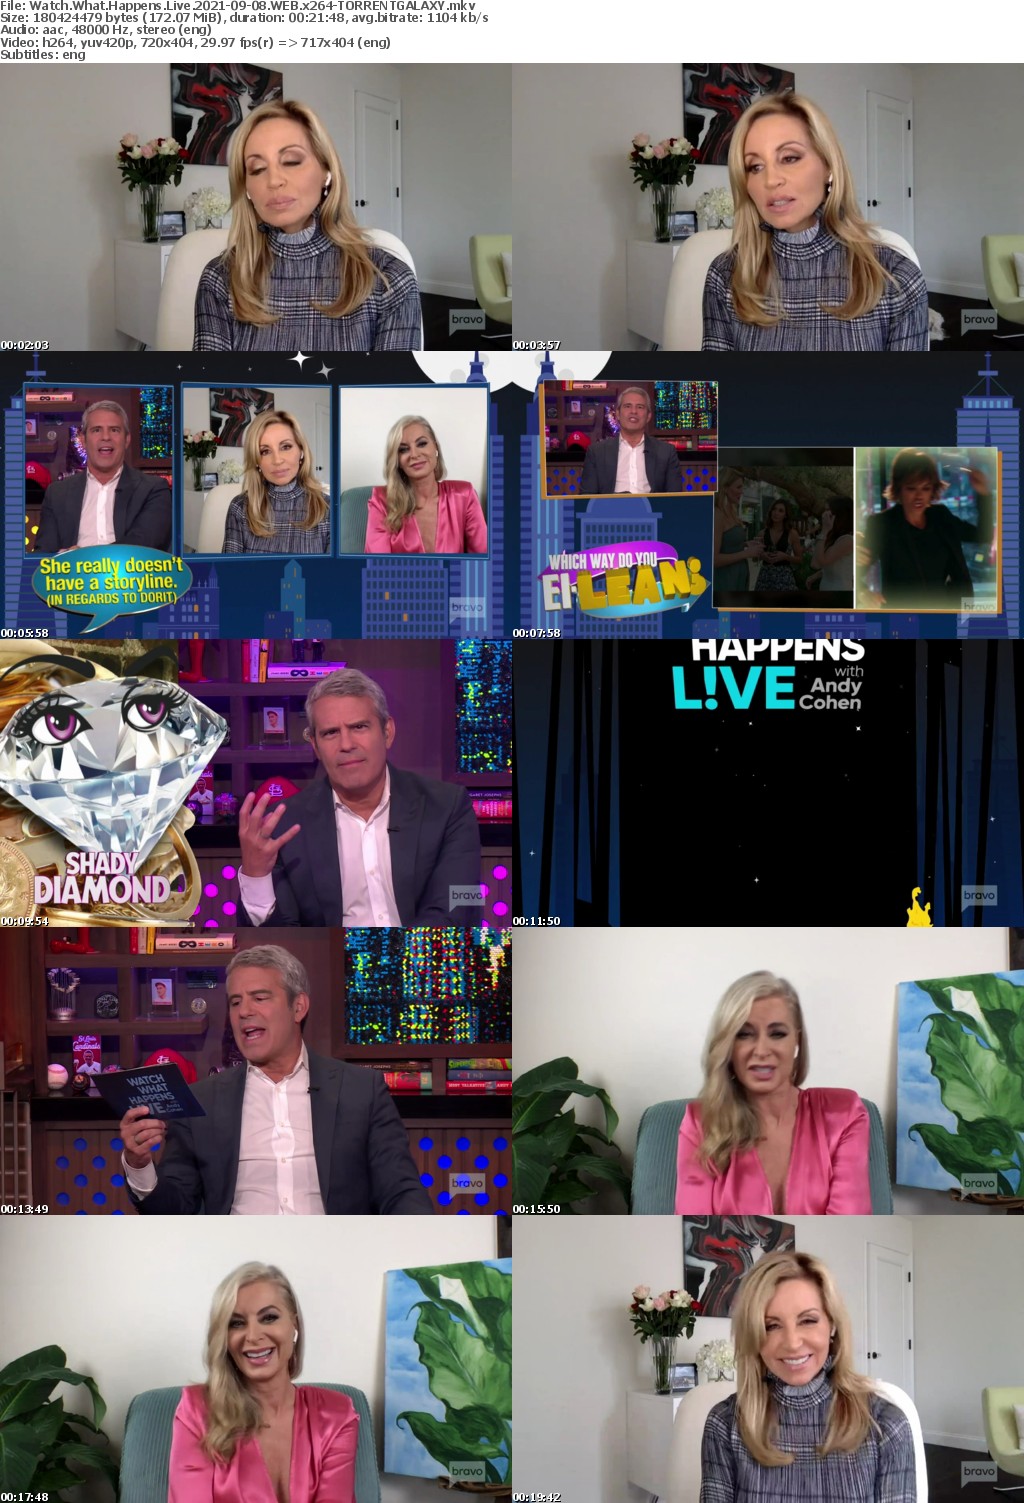 Watch What Happens Live 2021-09-08 WEB x264-GALAXY